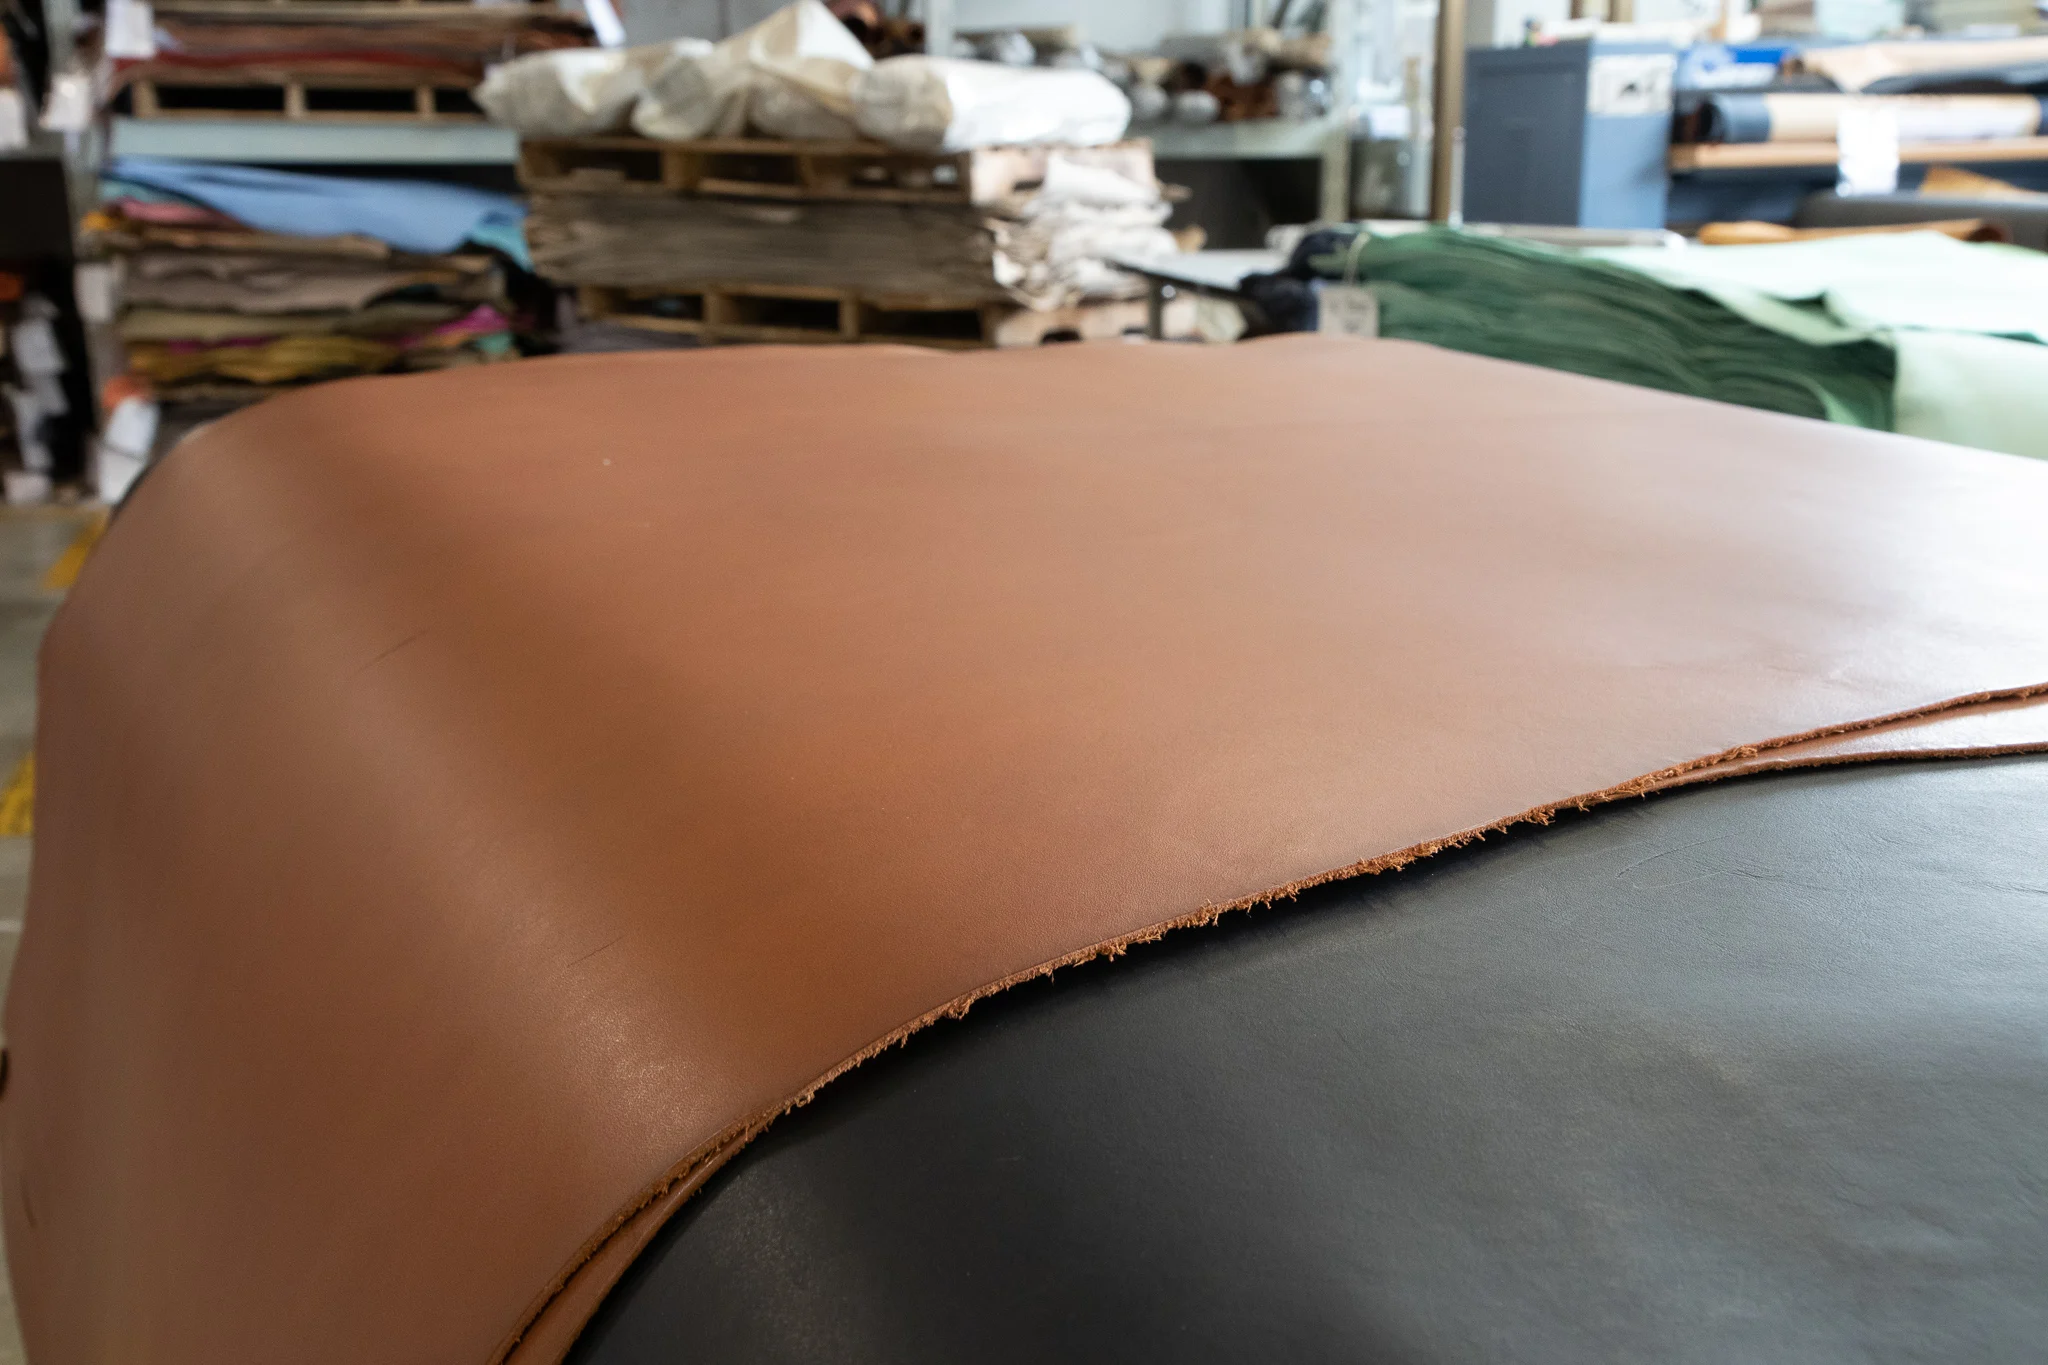 Caring for leather